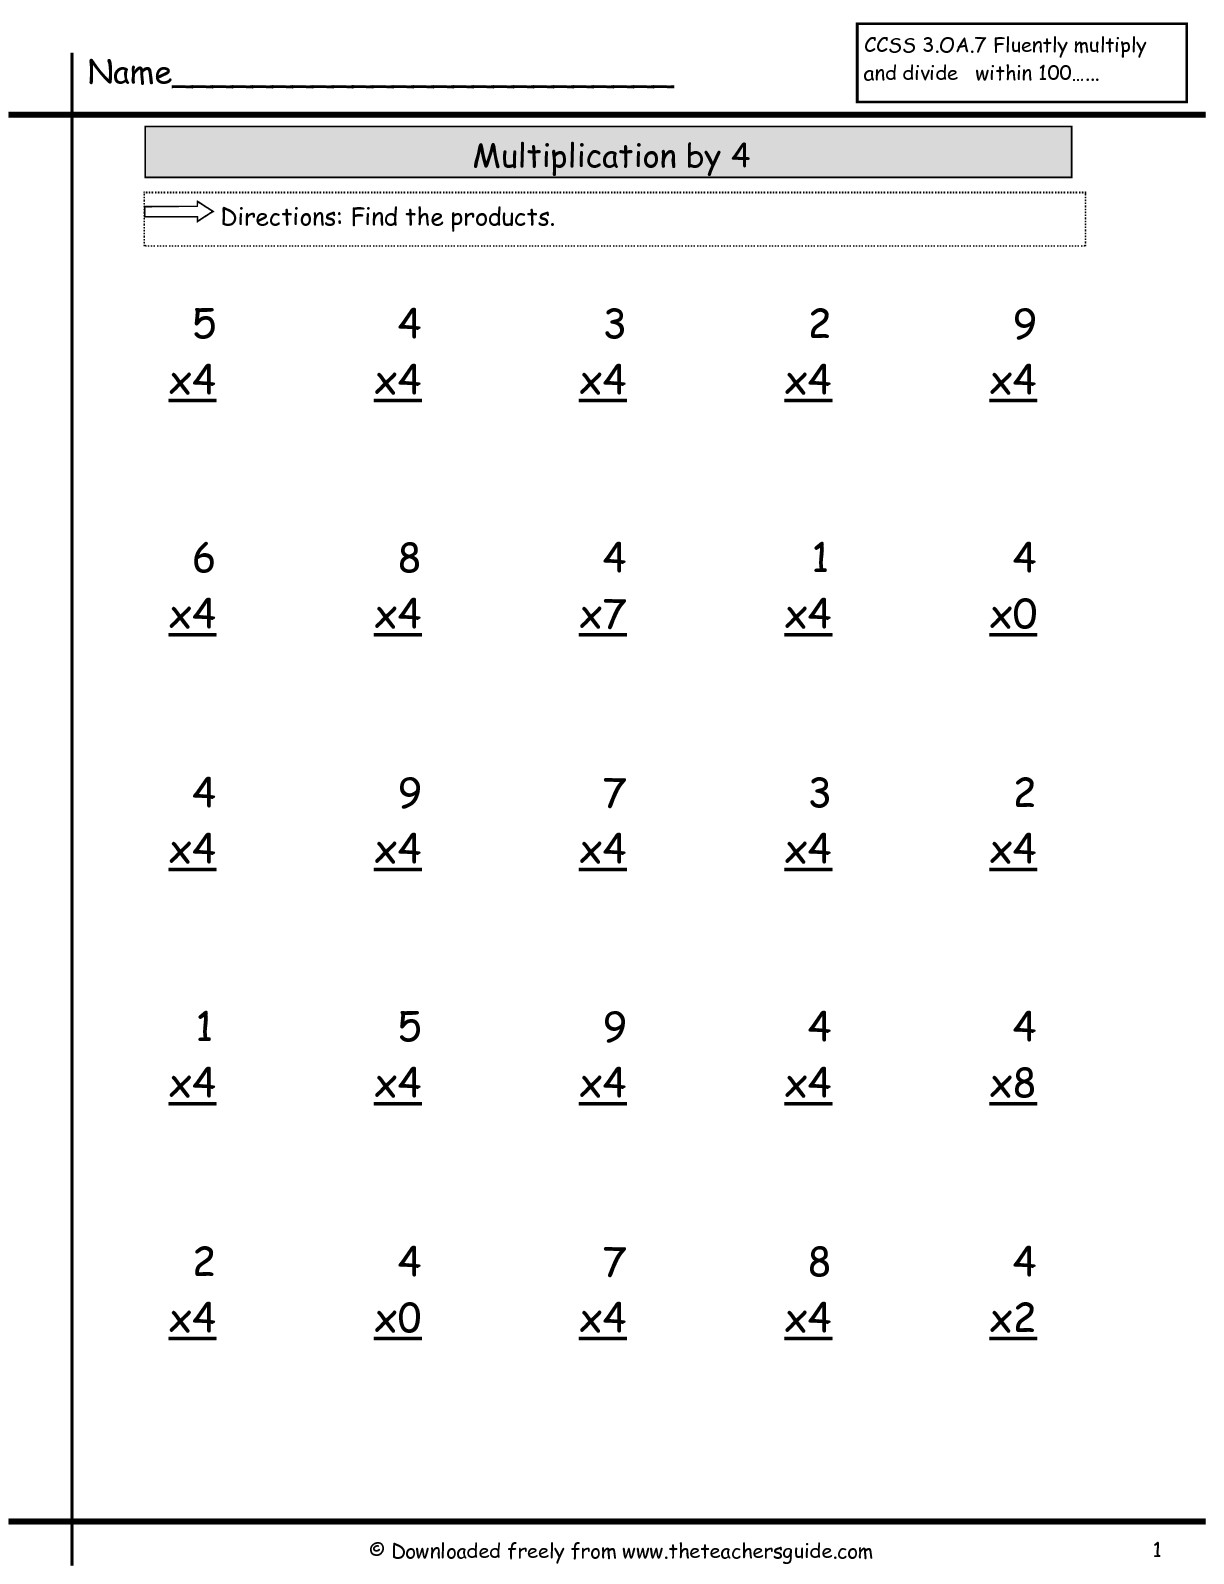 Multiplication Facts Worksheets From The Teacher&amp;#039;s Guide in Multiplication Worksheets X4